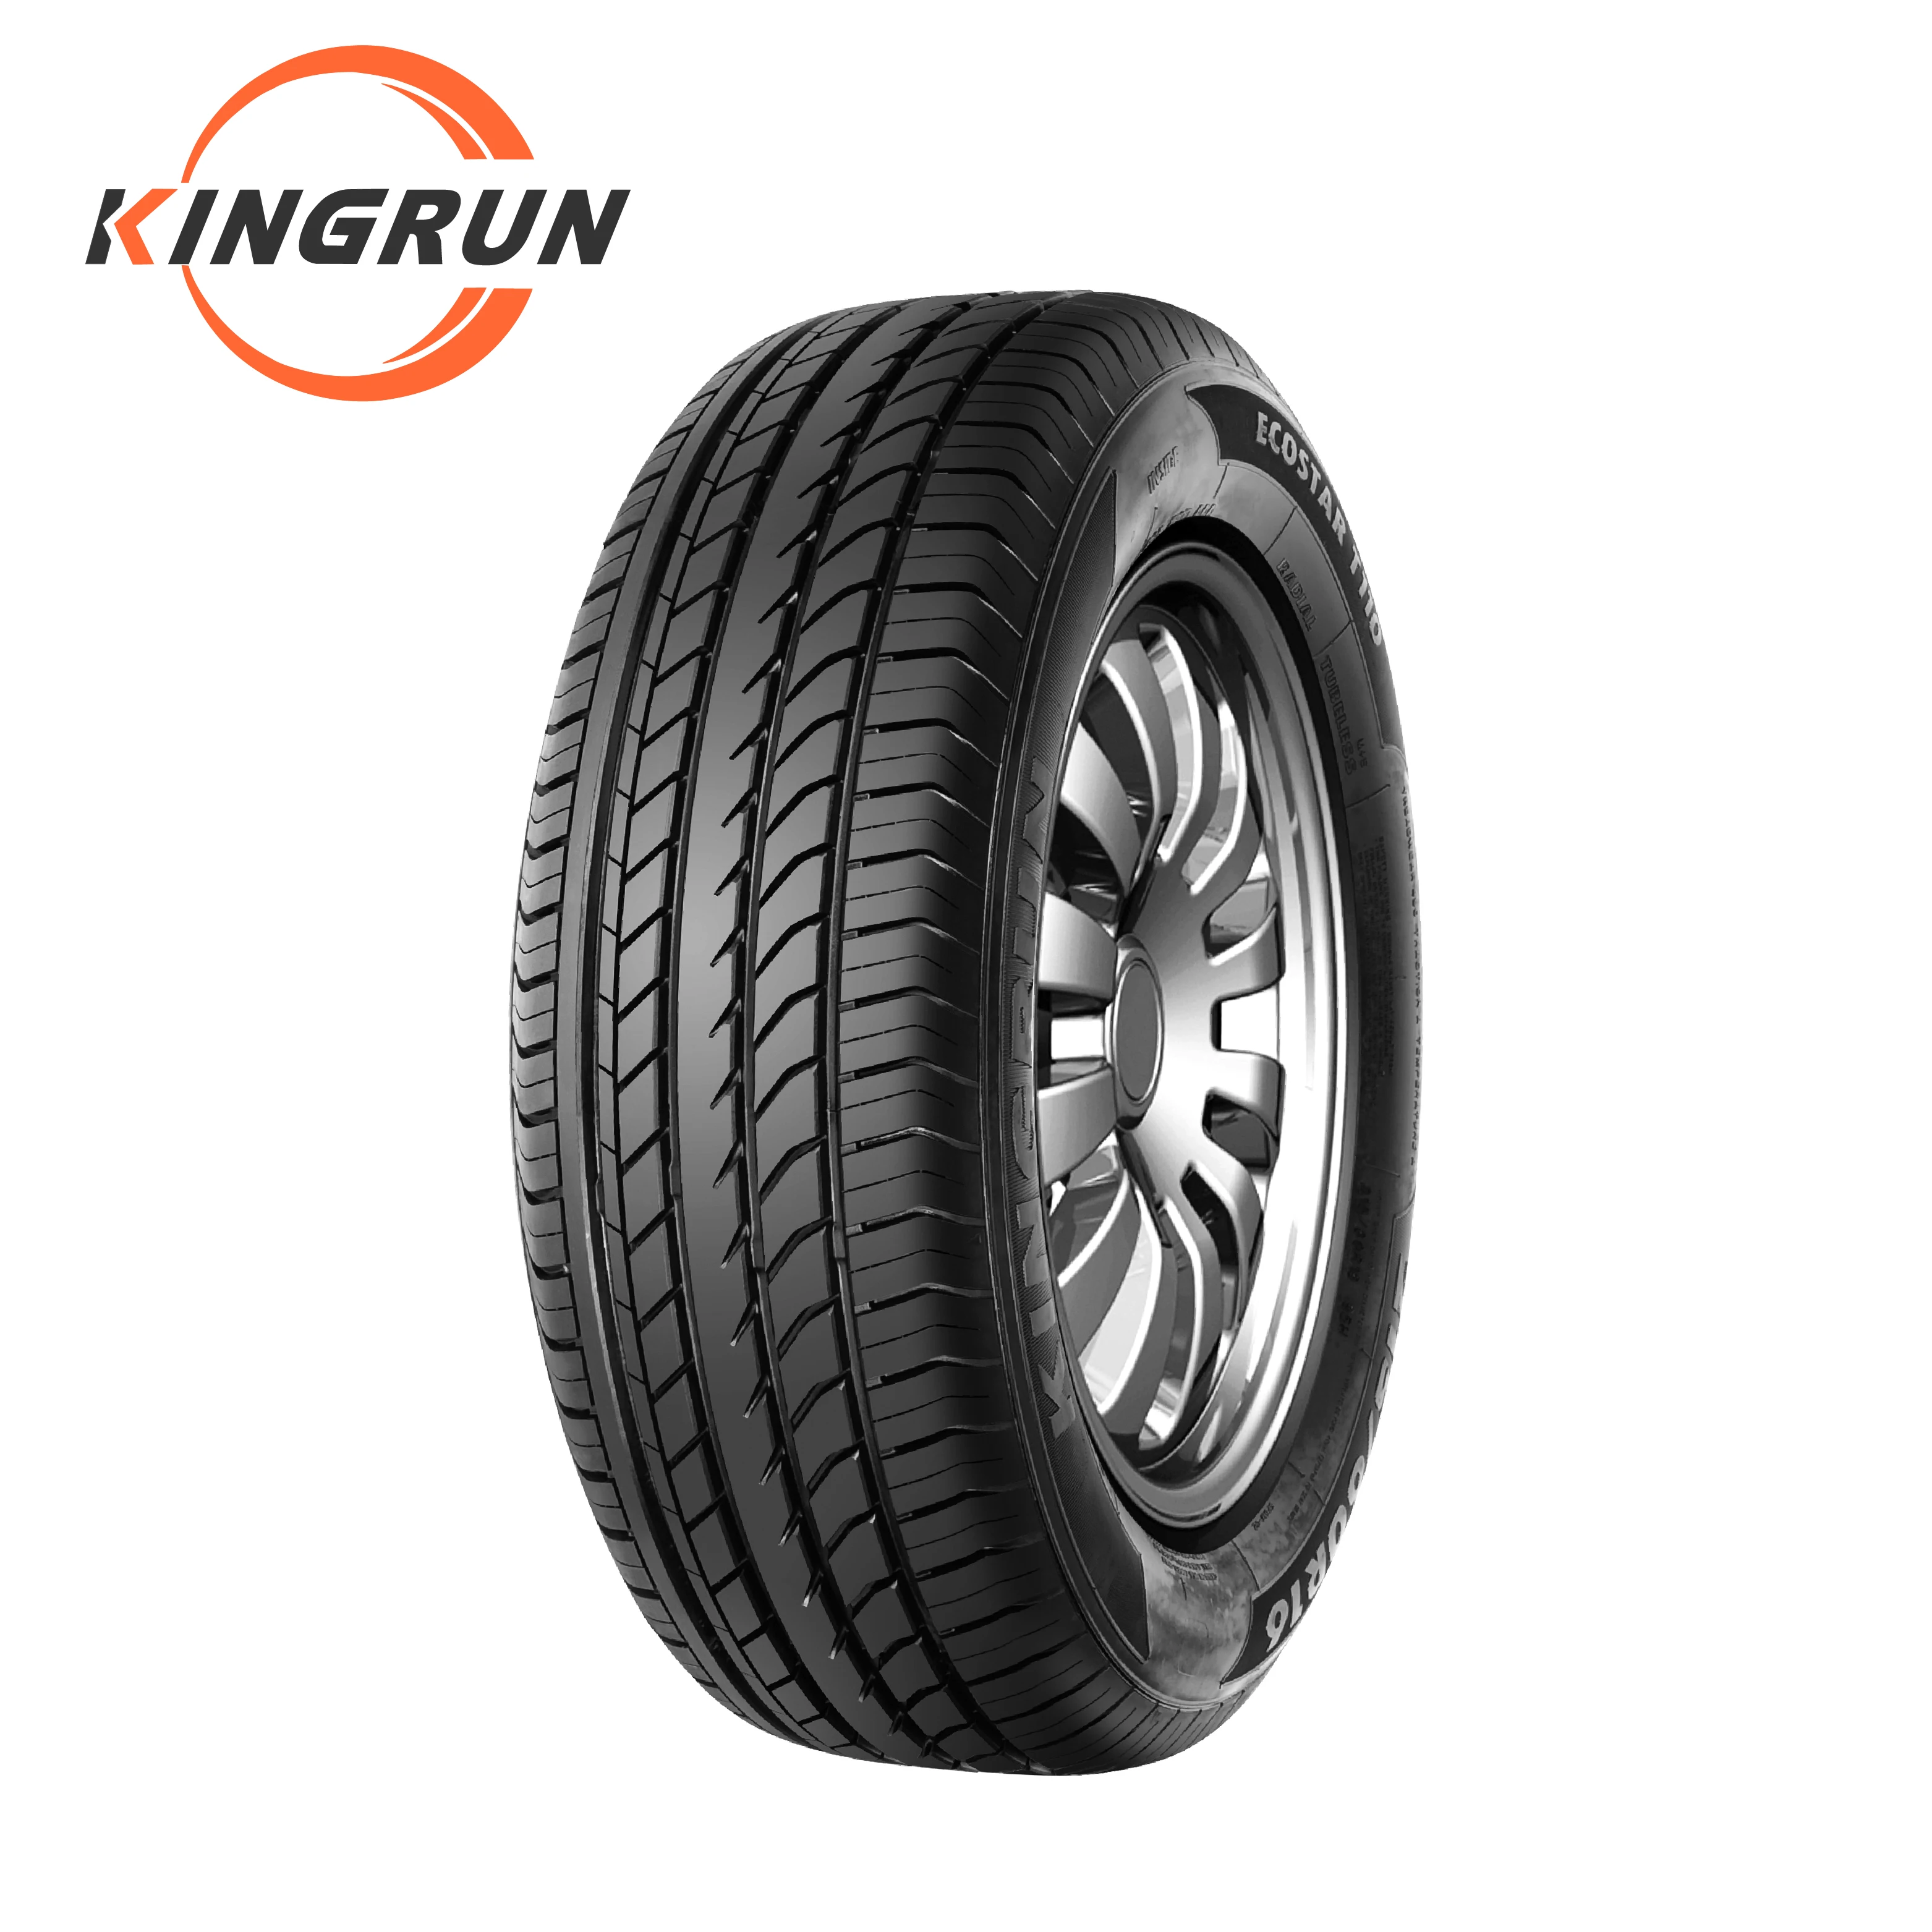 Tires and wheels, TRANSTONE Tire 175/70R13